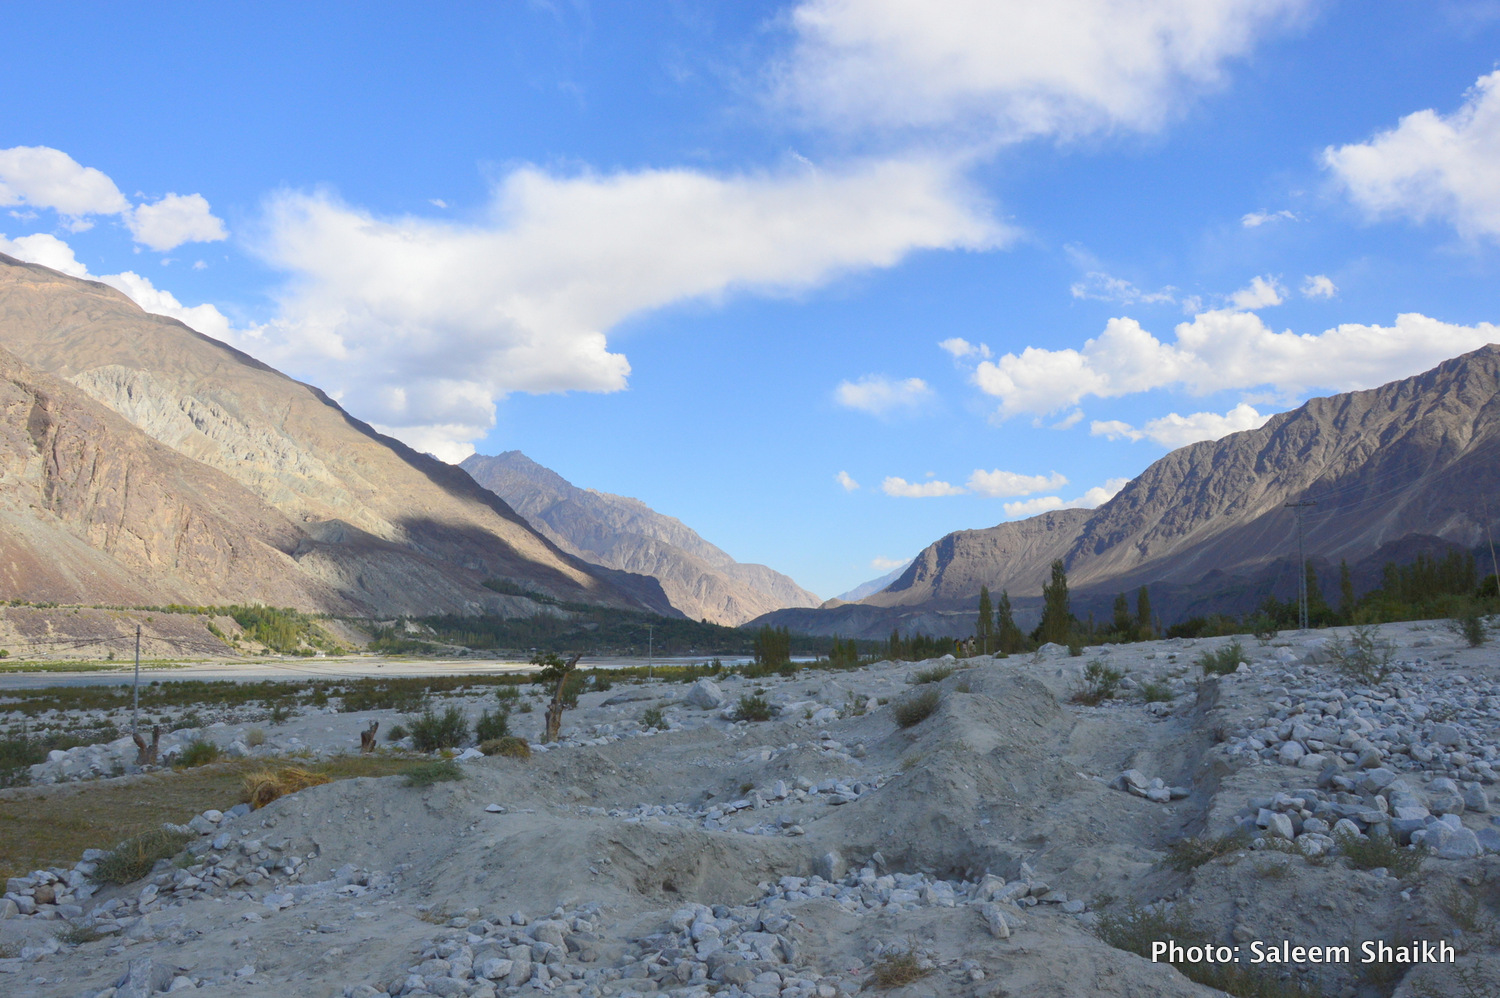 A view of once-fertile maize, potato and what fields now under the mud and heavy boulders washed down by the devastating 2010 flash flood in Damaas valley of Gilgit-Baltistan region’s scenic Ghizer district, Pakistan’s north. Photo credit: Saleem Shaikh